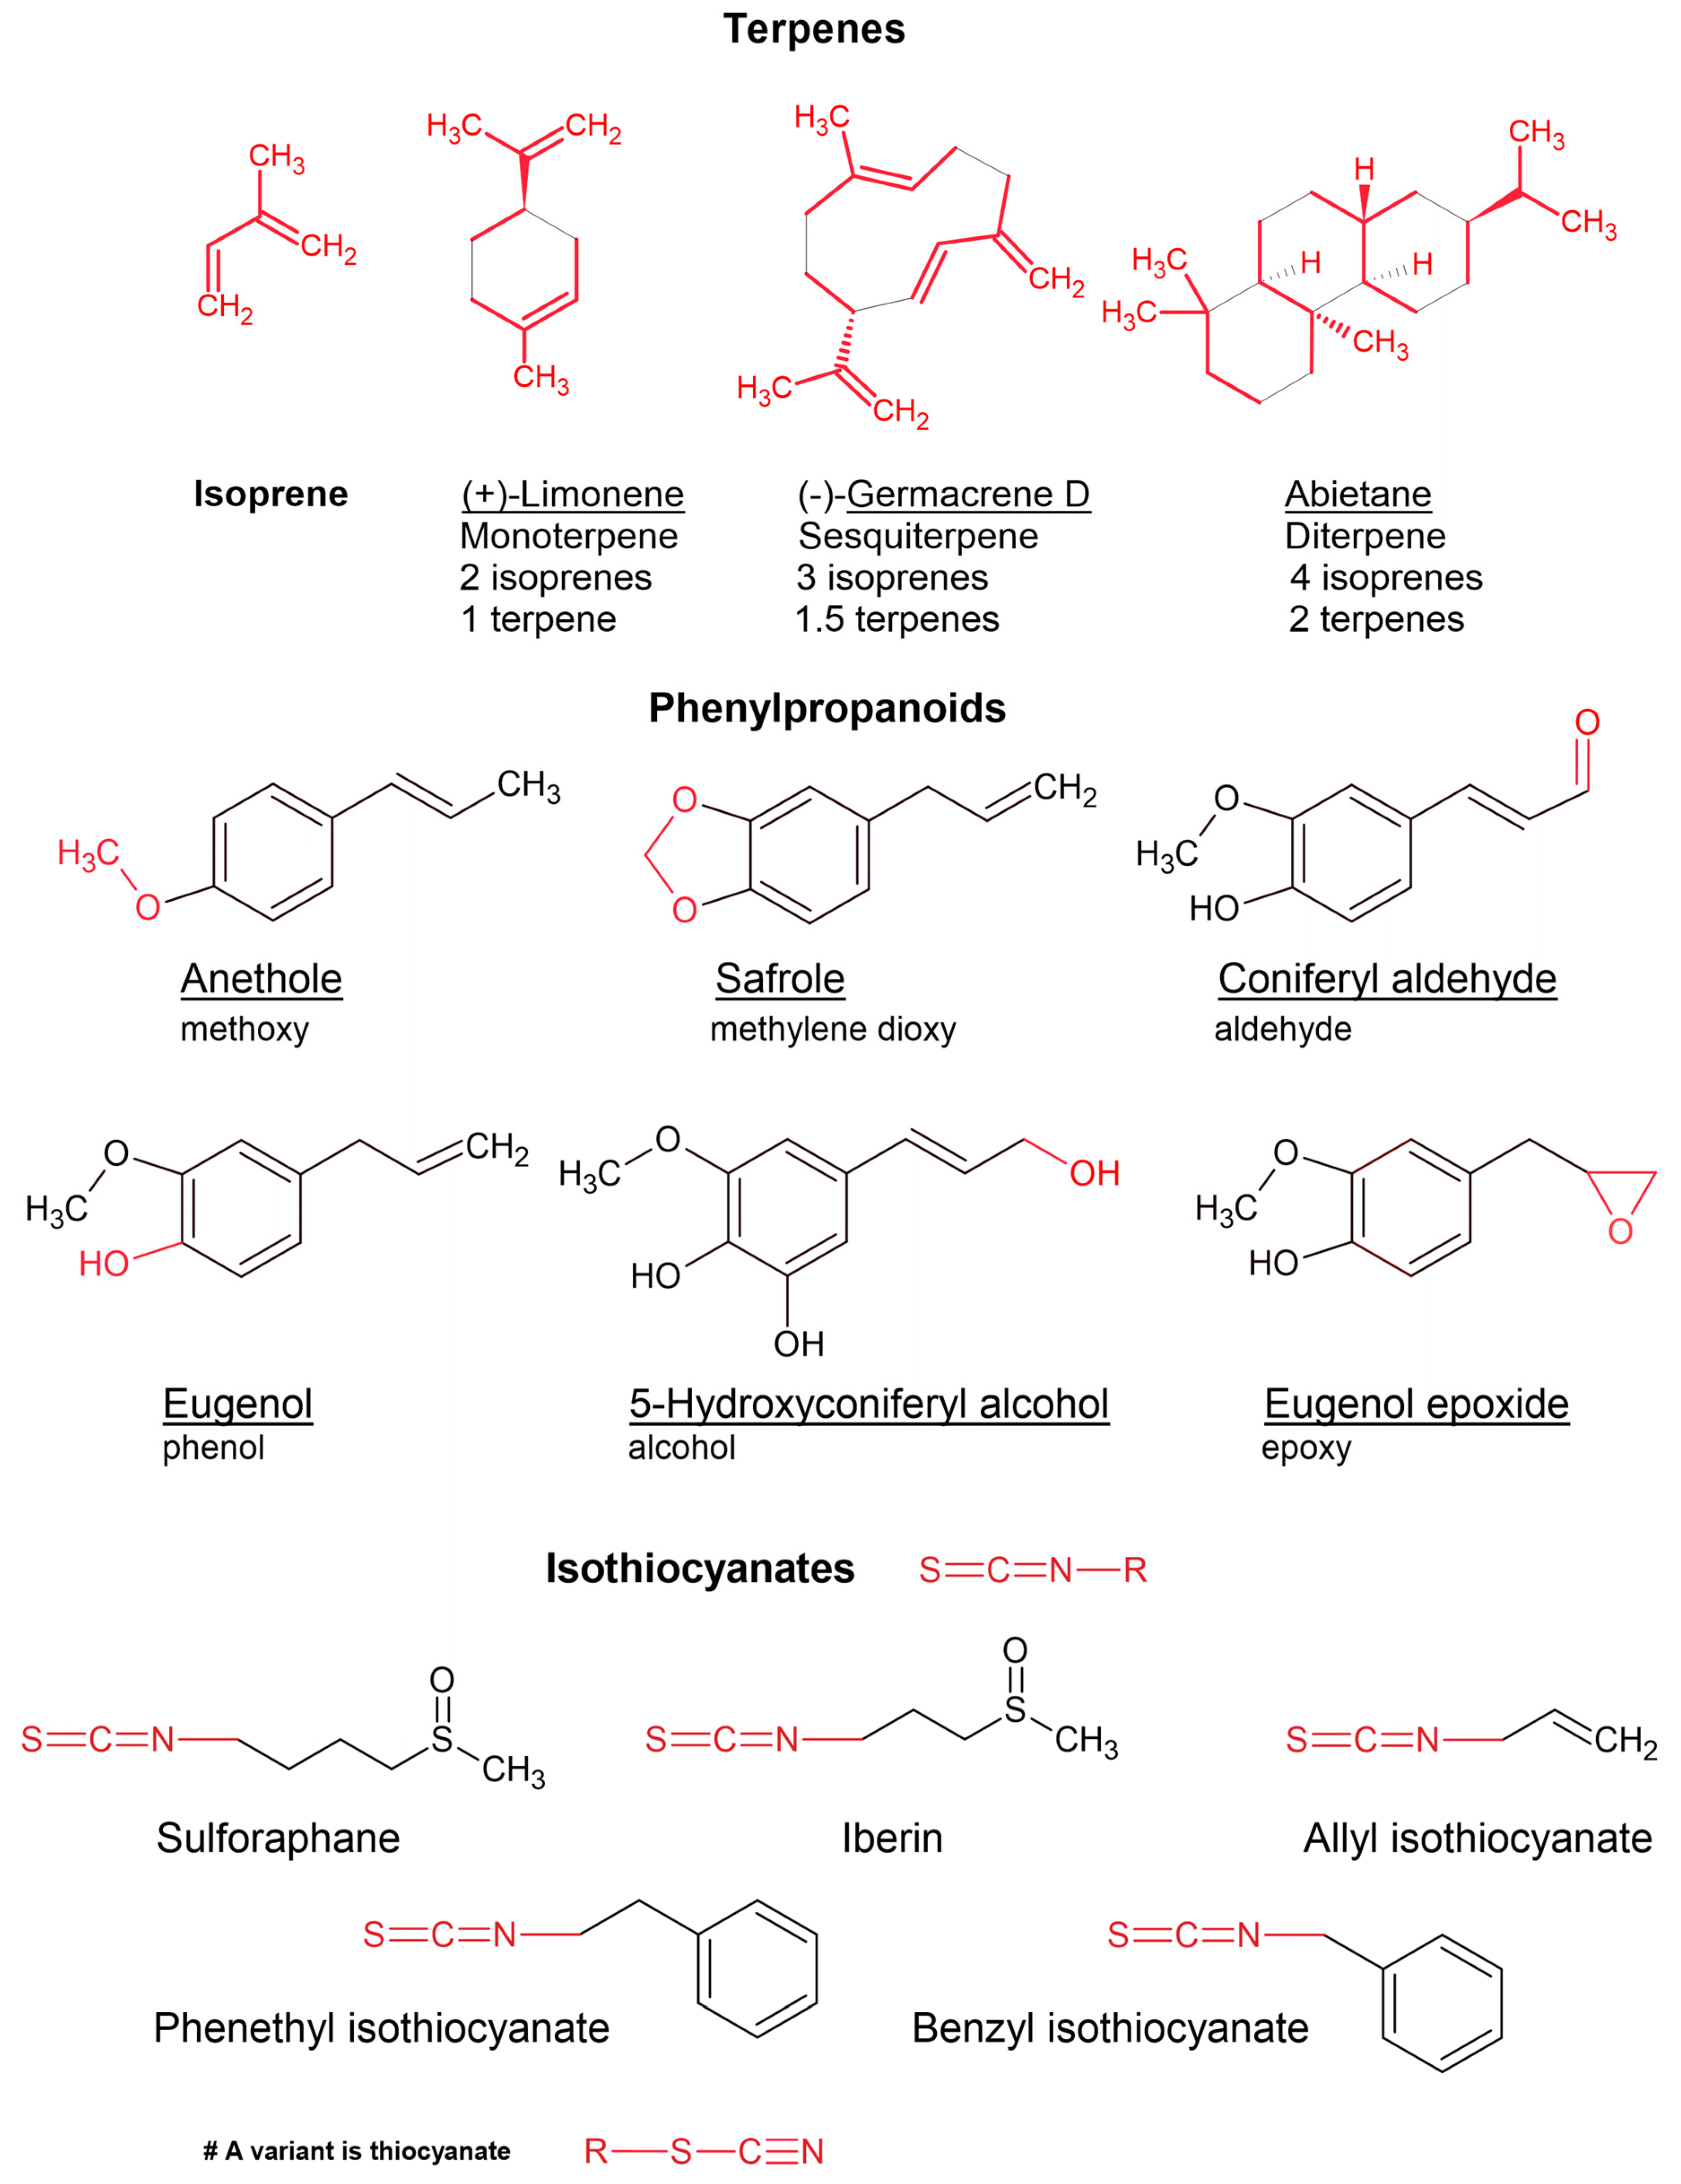 Essential Oil Research: Trends in Biosynthesis, Analytics